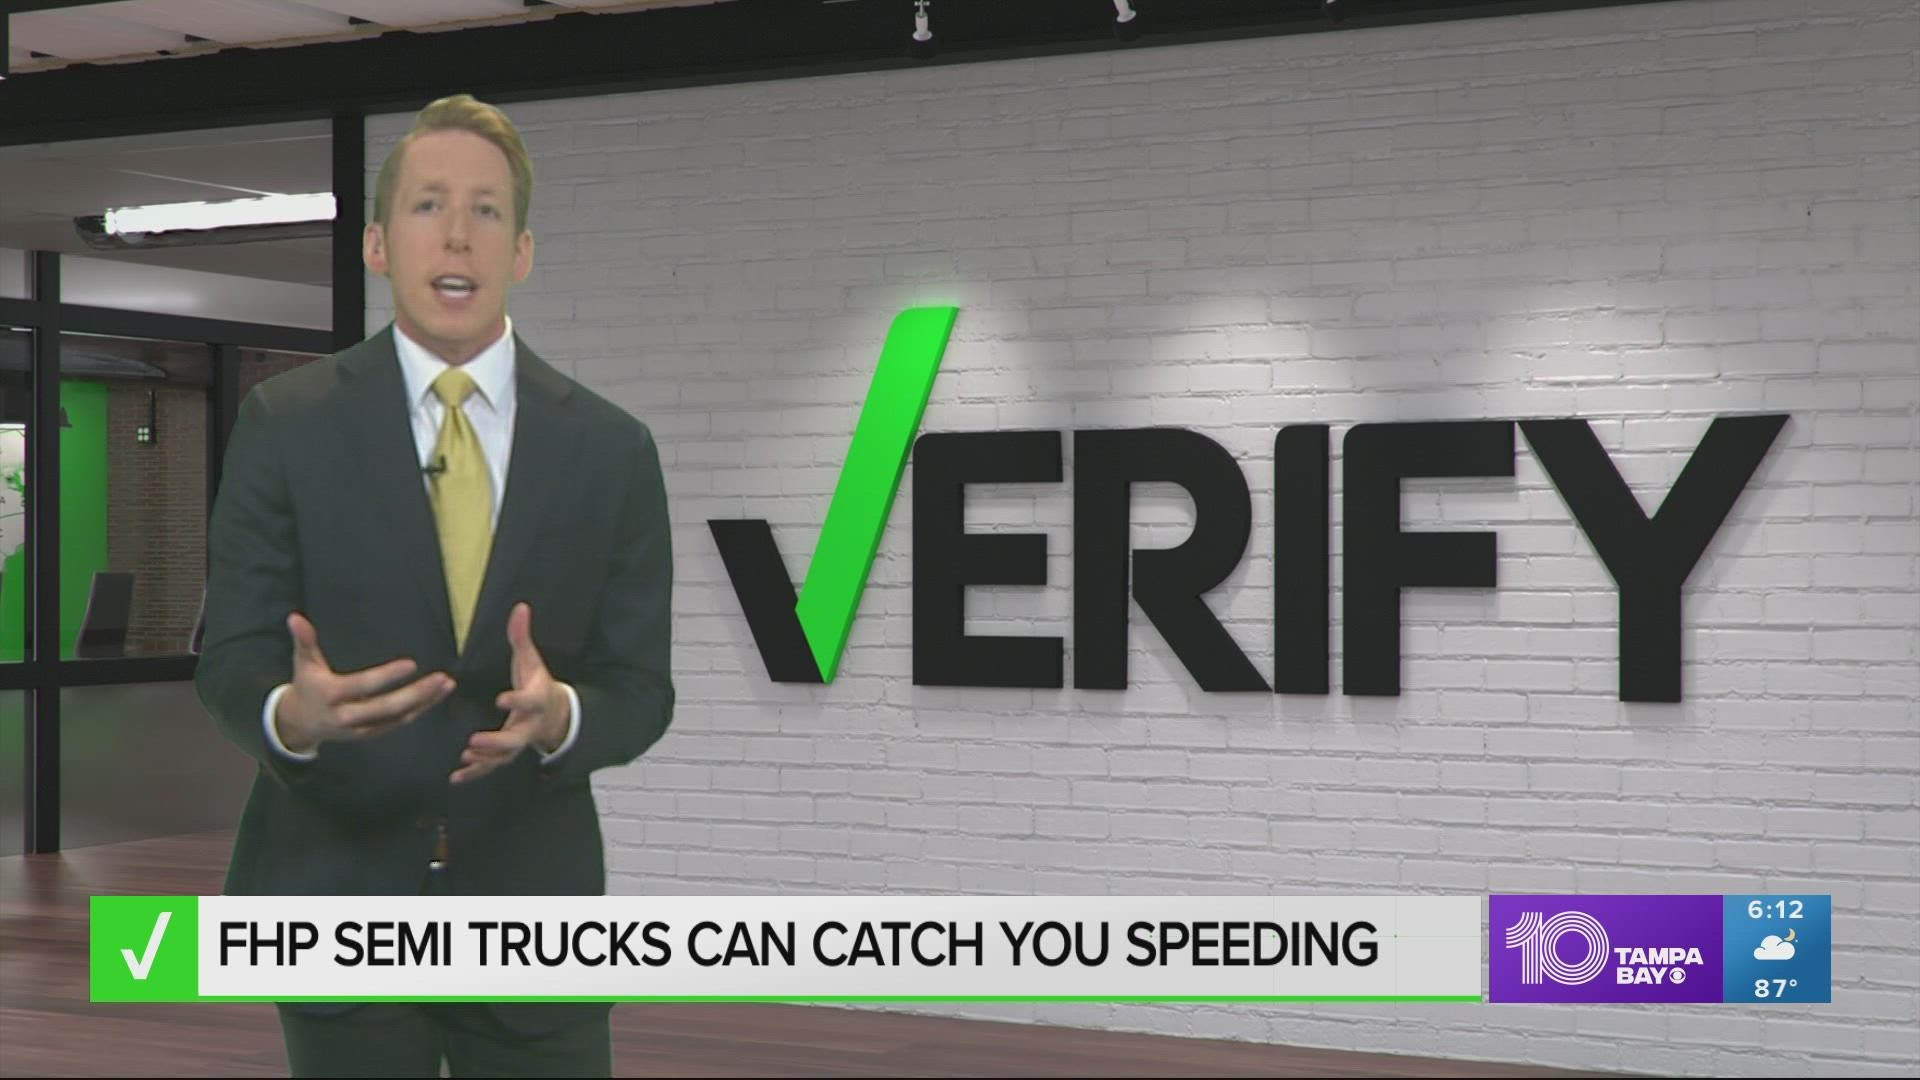 But the agency says the marked trucks are primarily used to promote safety campaigns, not for traffic stops.